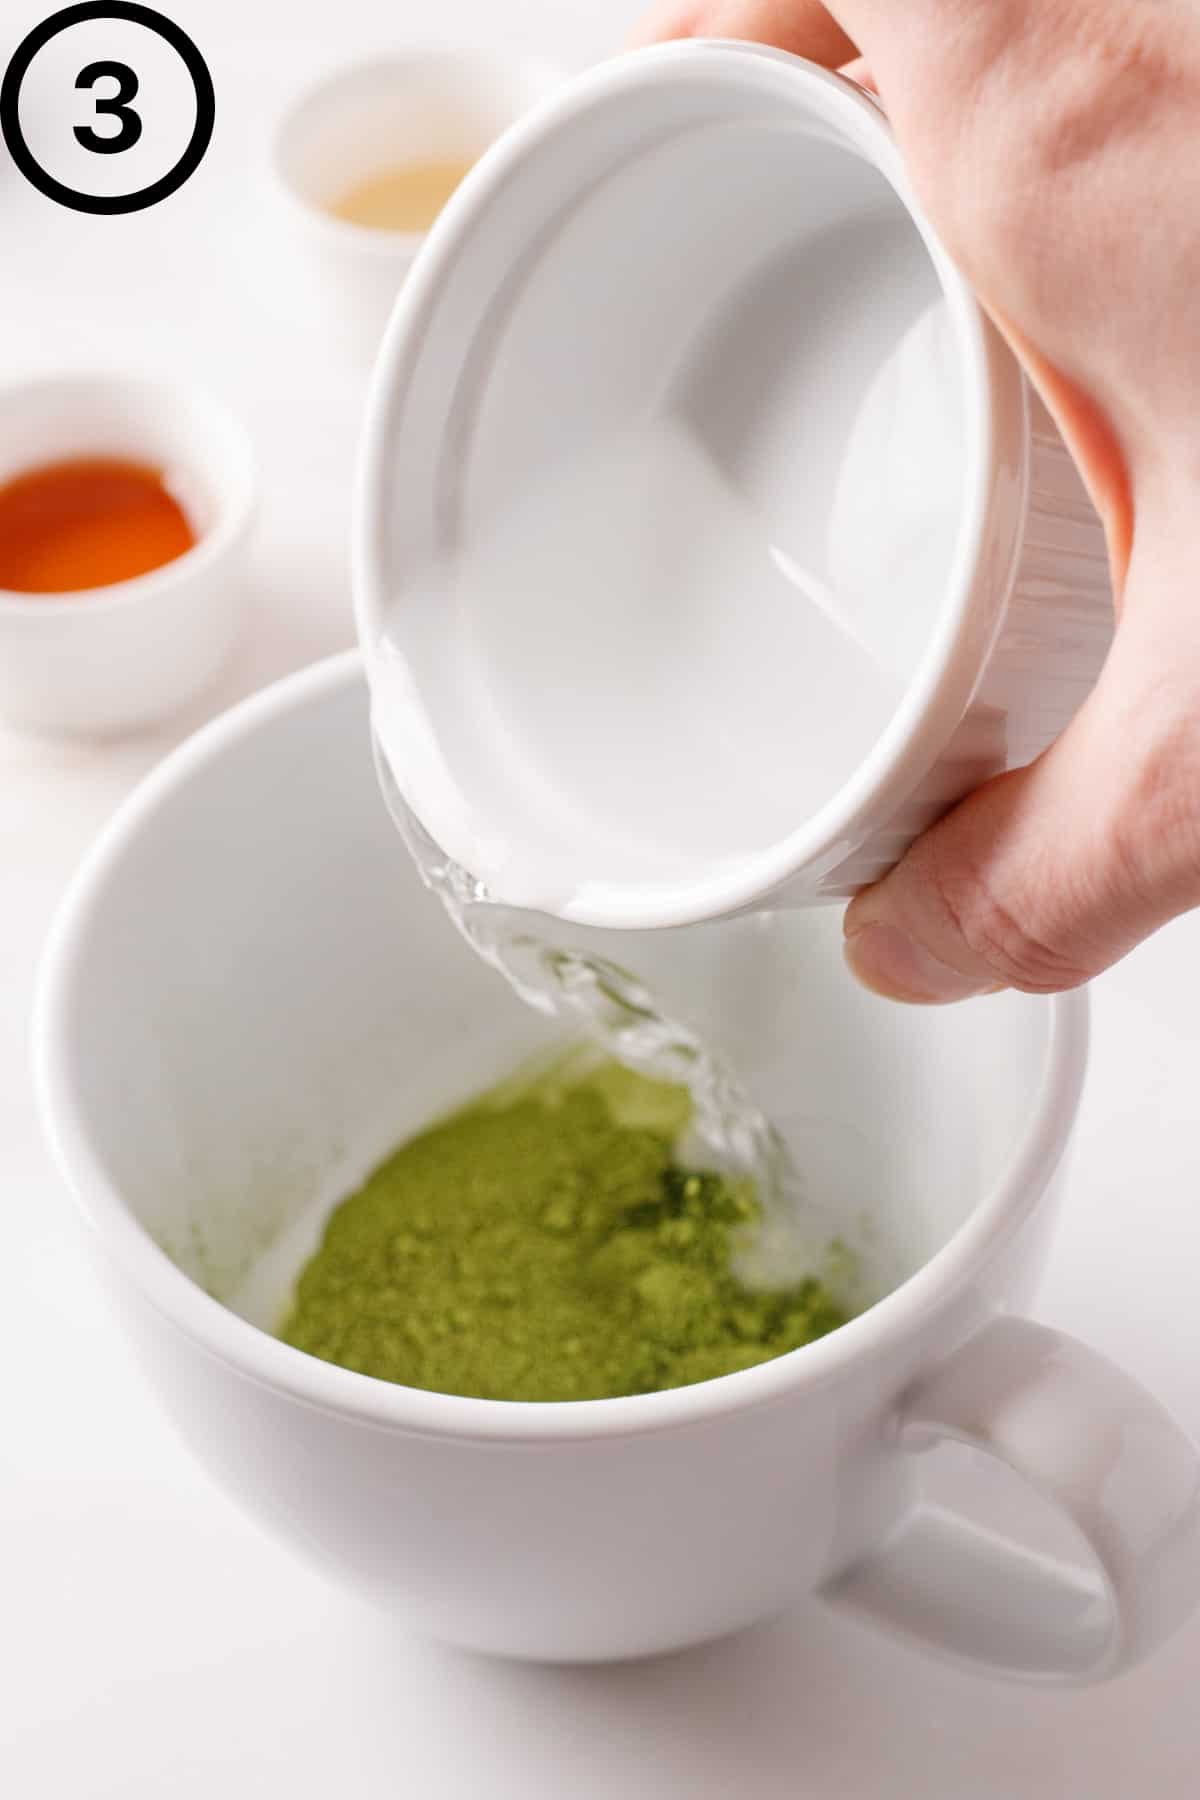 Pouring hot water into the mug of matcha.